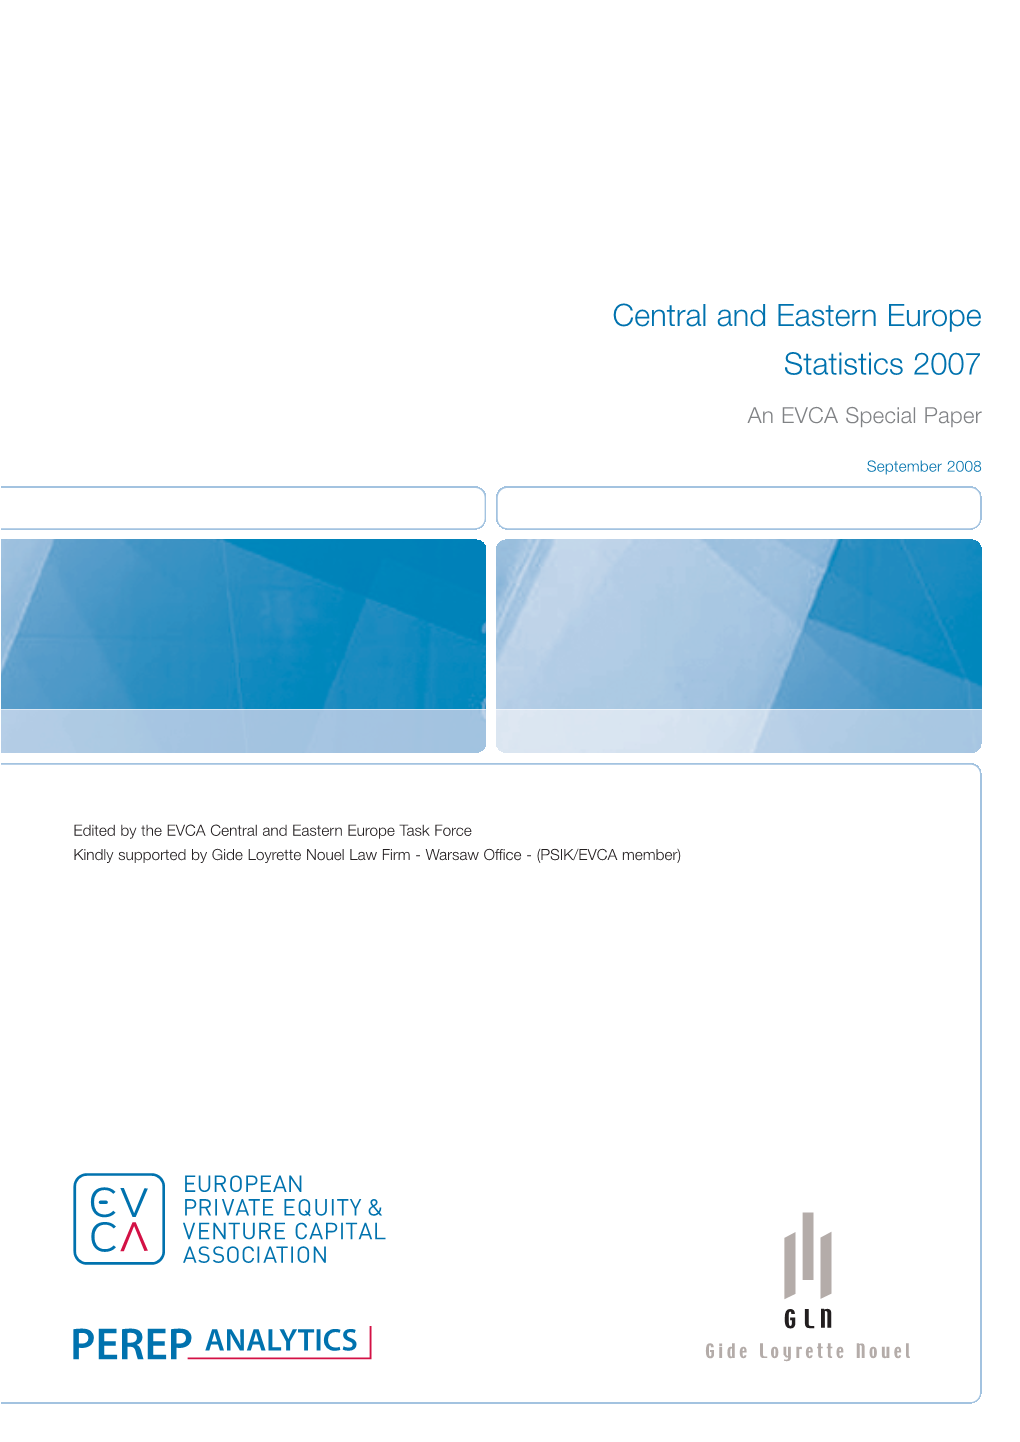 Central and Eastern Europe Statistics 2007